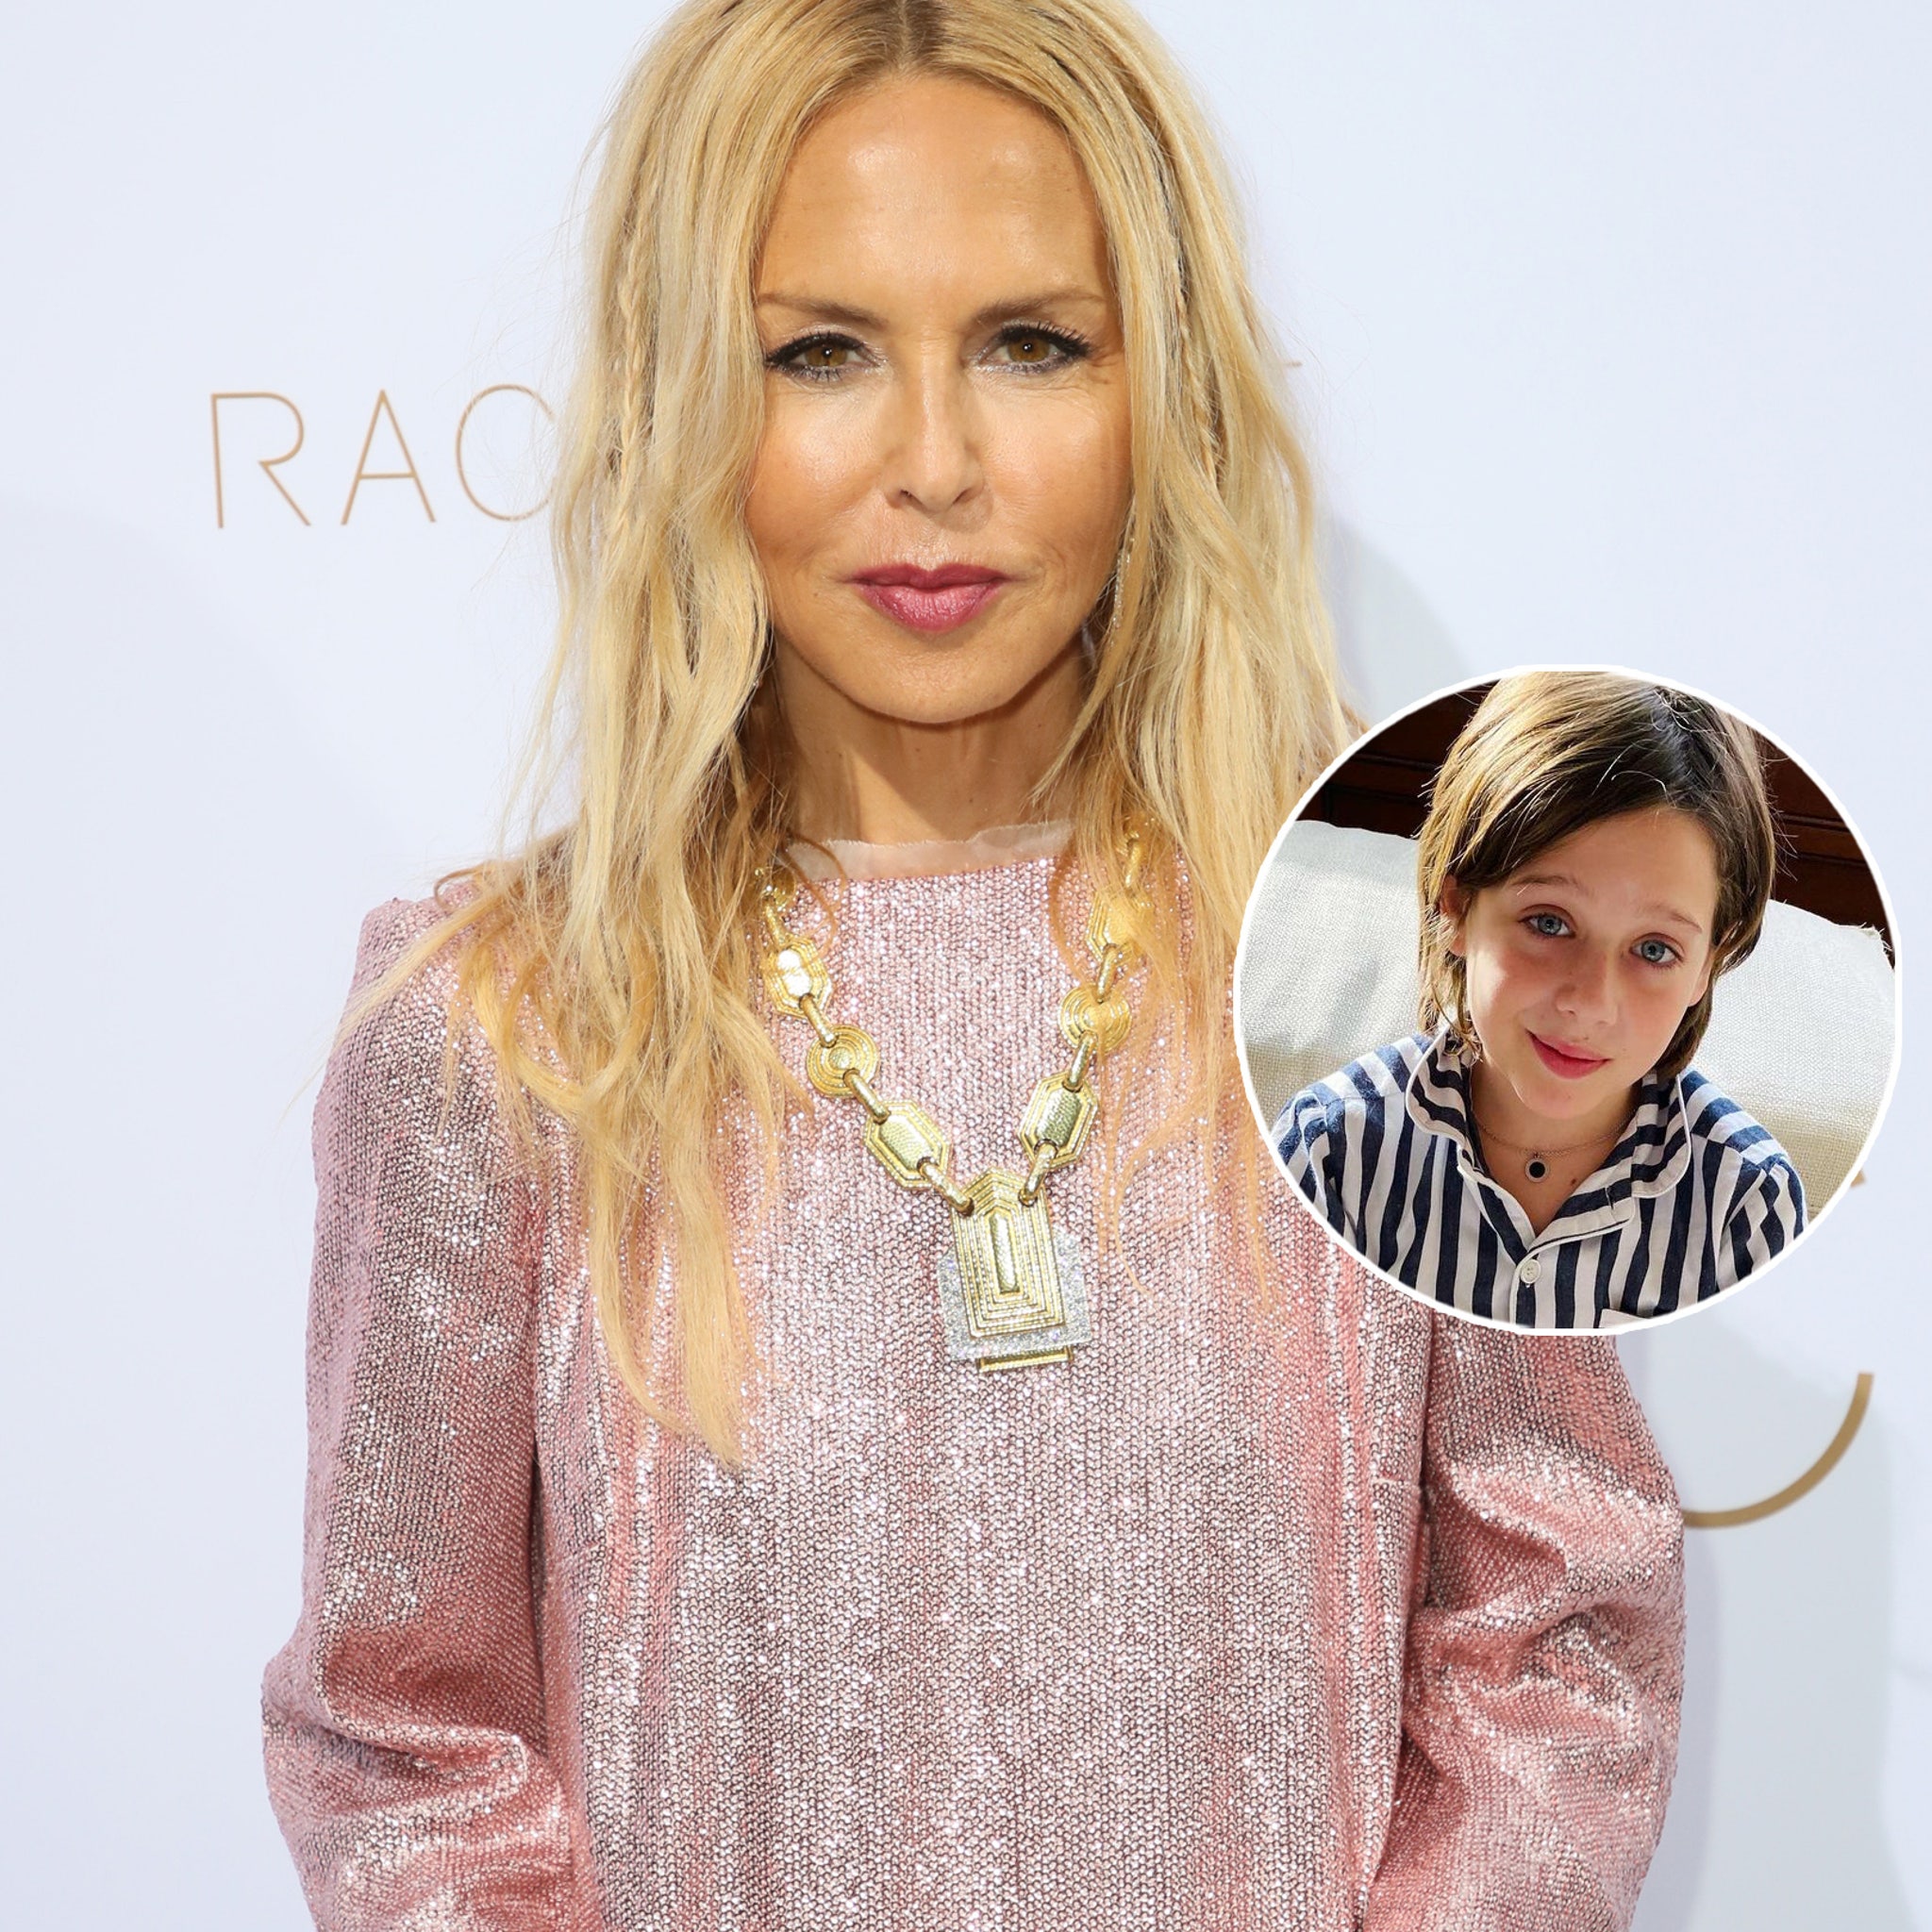 Rachel Zoe Details Son's Ski Lift Fall: 'Worst Day of Our Lives